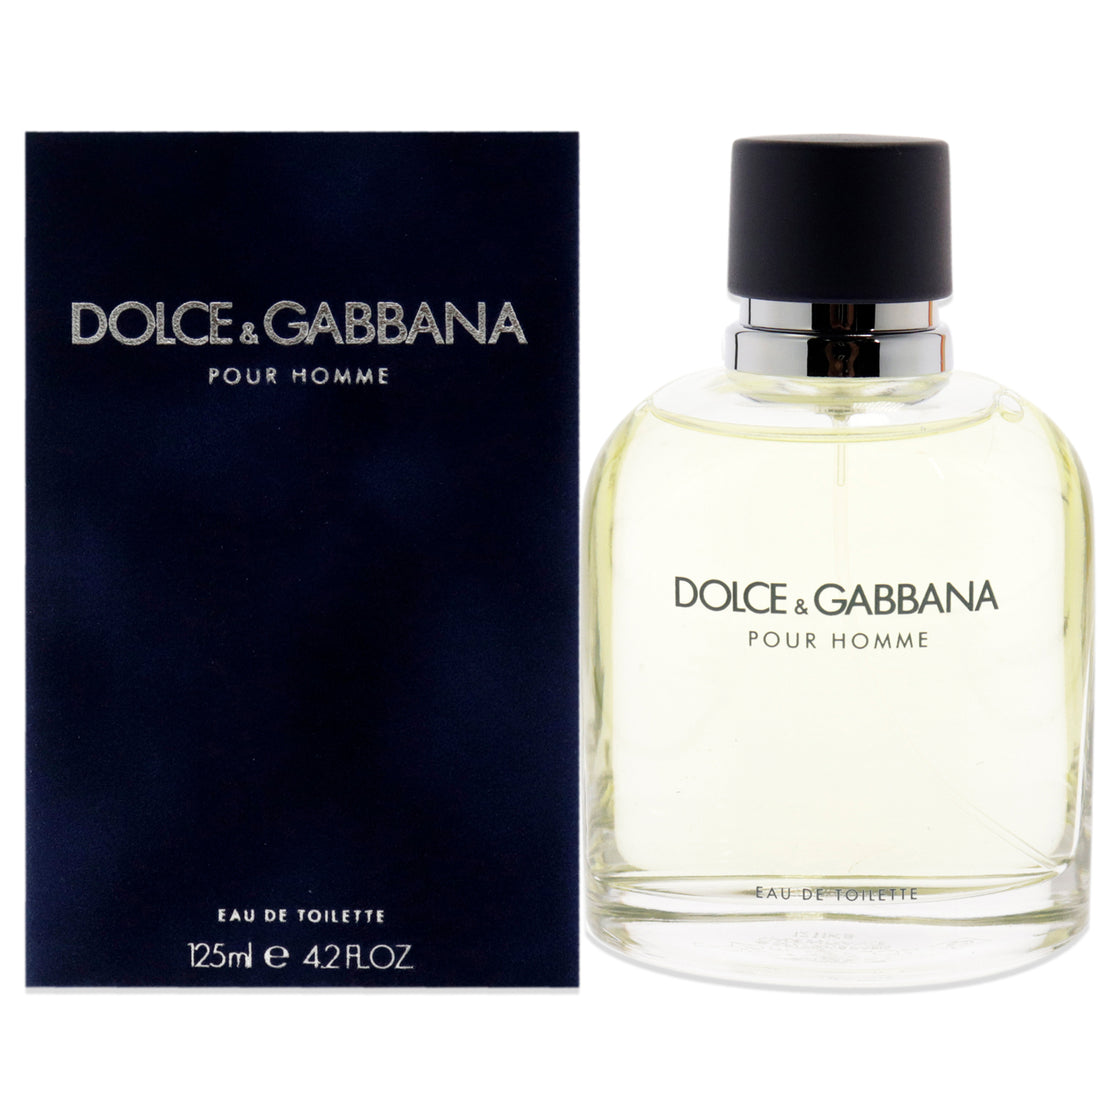 Dolce and Gabbana by Dolce and Gabbana for Men - 4.2 oz EDT Spray